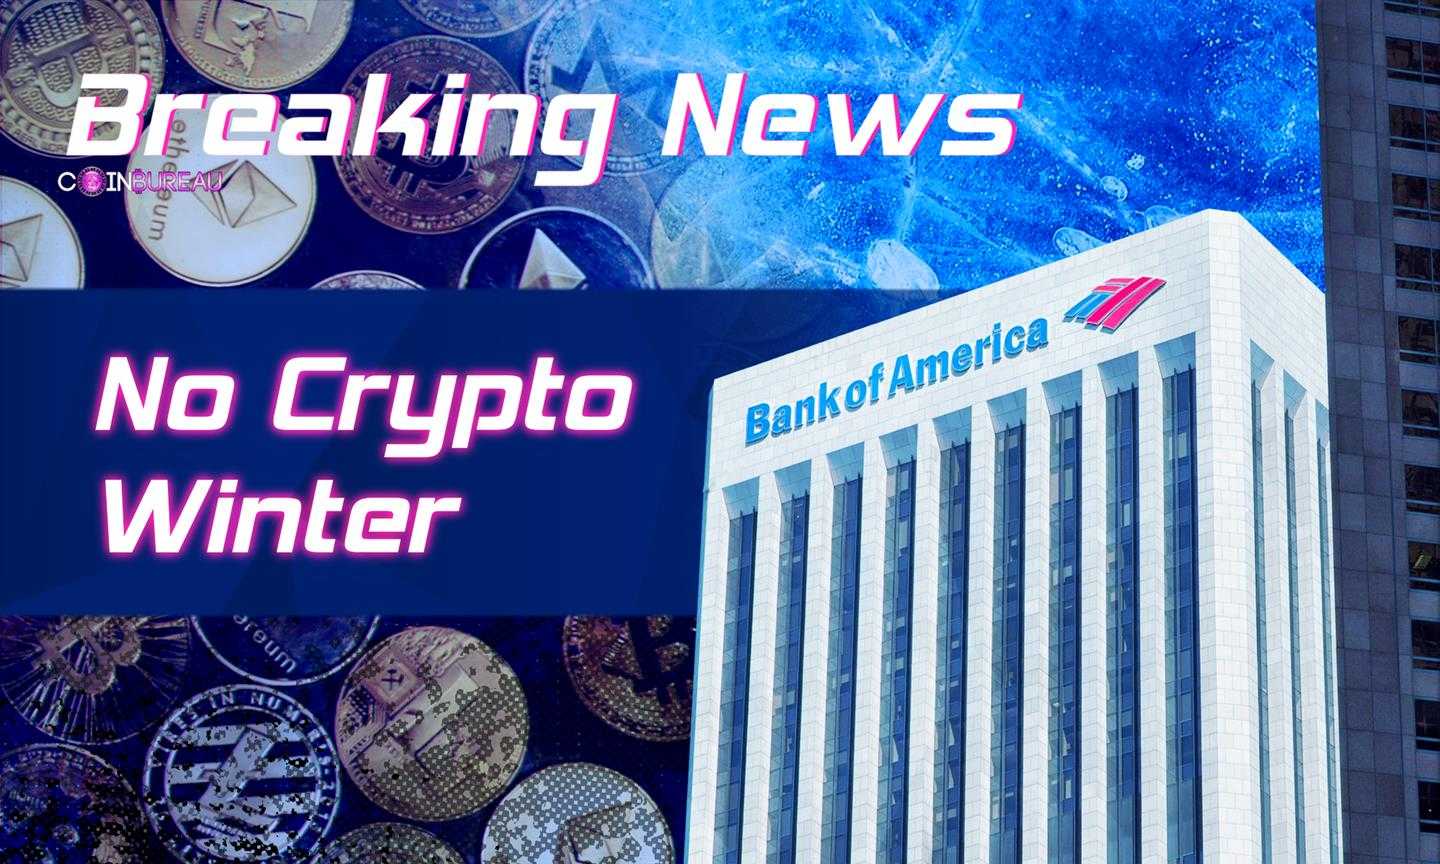 Bank of America Says No Crypto Winter, Citing Develpper Activity and User Growth